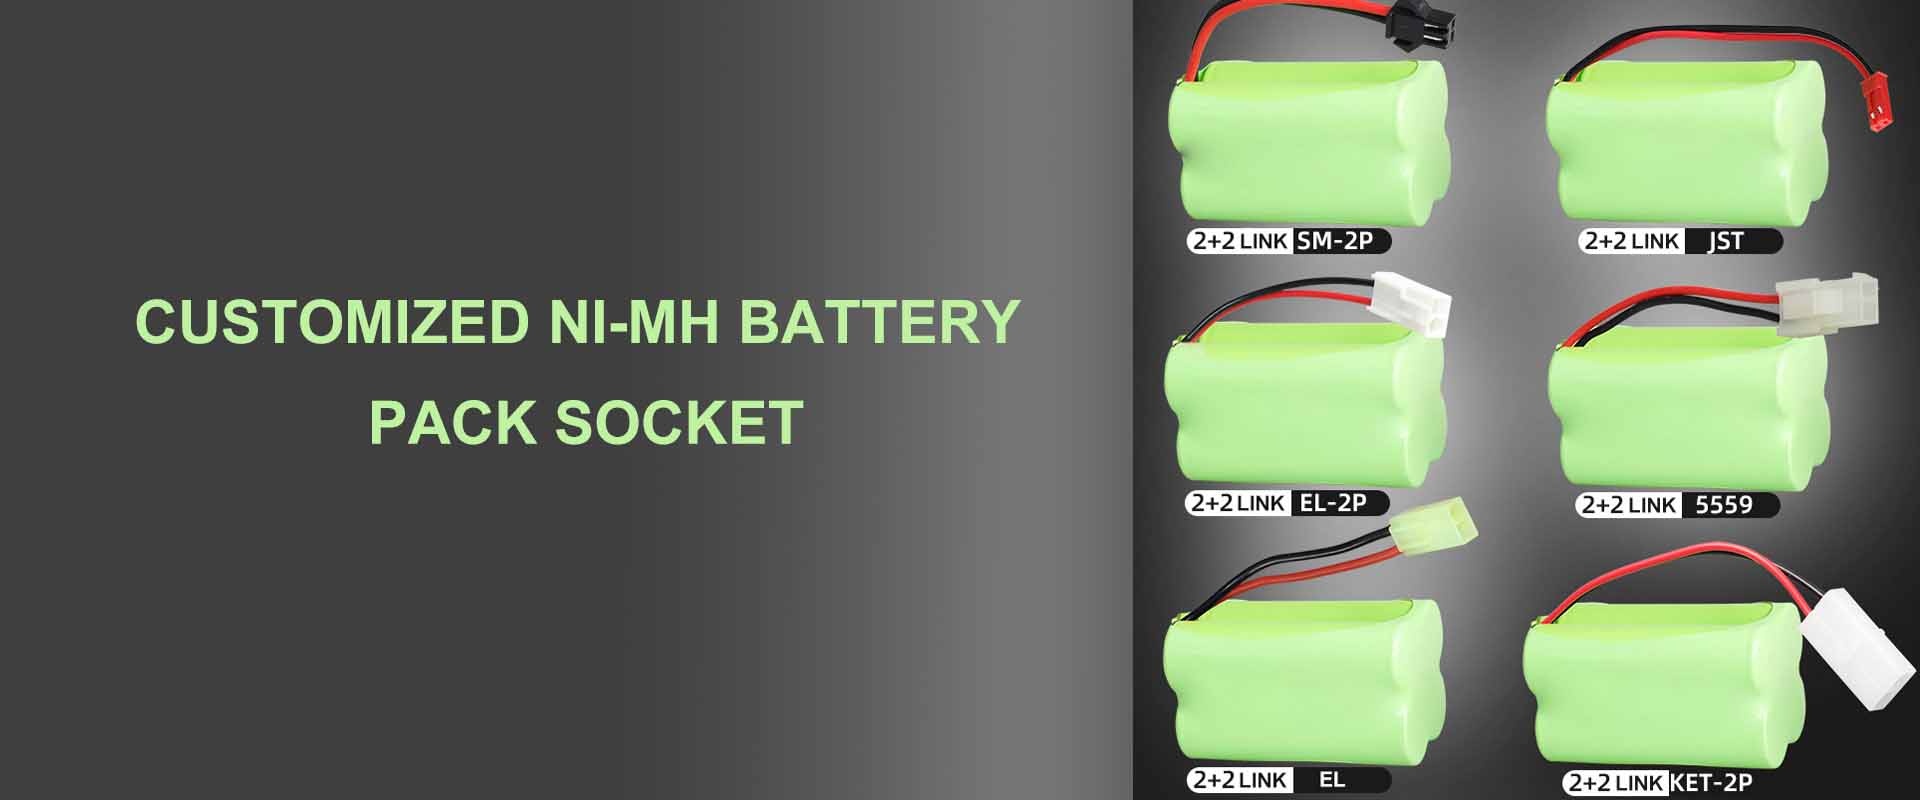 How to condition and use NiMH battery pack FAQ